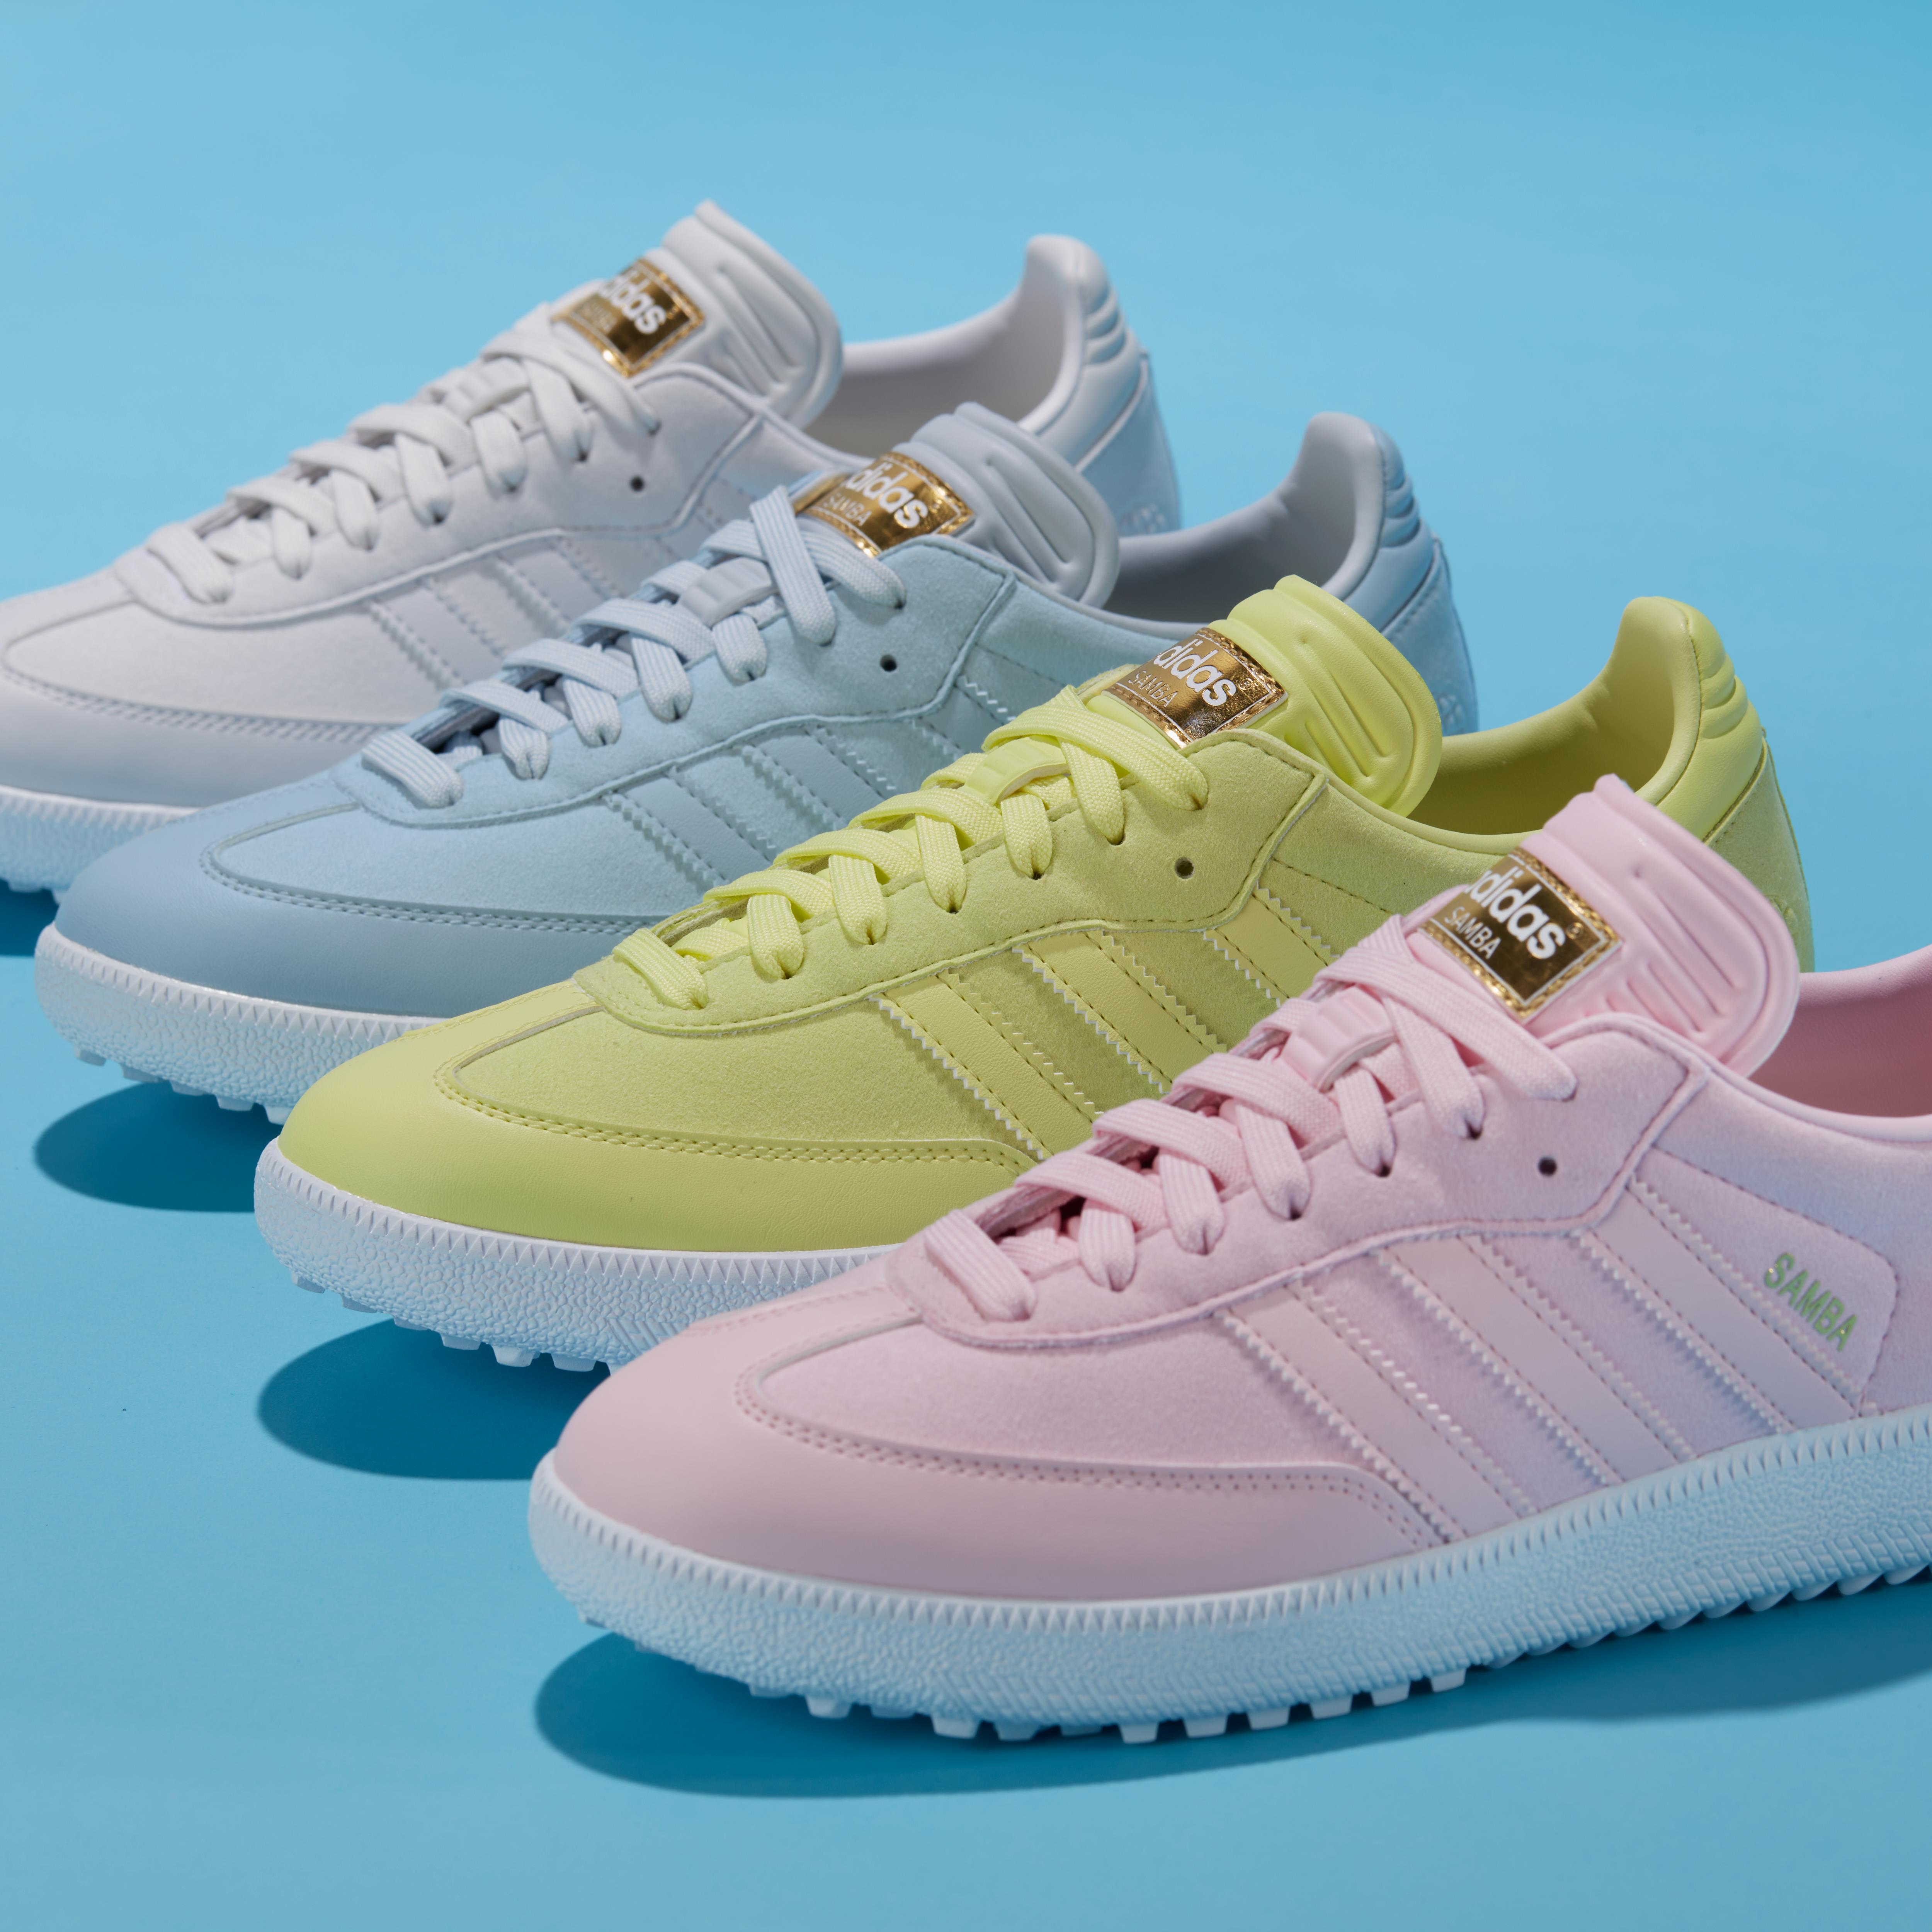 Dominante Calibre Galaxia Everything you need to know about the Adidas Samba golf shoe | Golf  Equipment: Clubs, Balls, Bags | Golf Digest